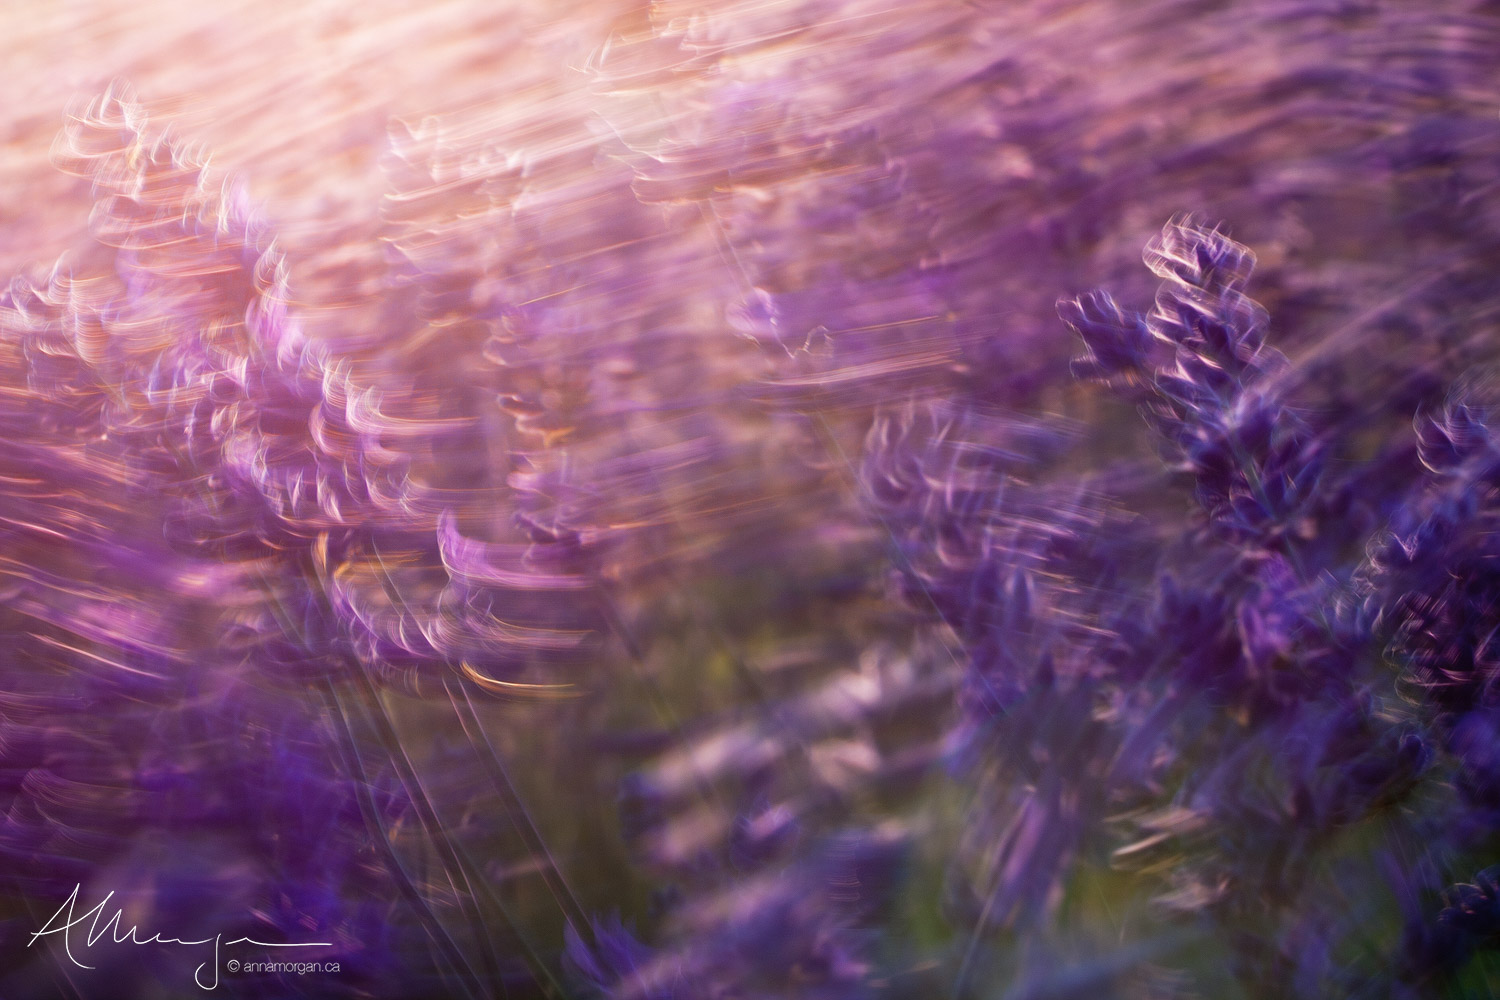 A long exposure of lavender plants at sunset shows the purple flowers swaying in the breeze